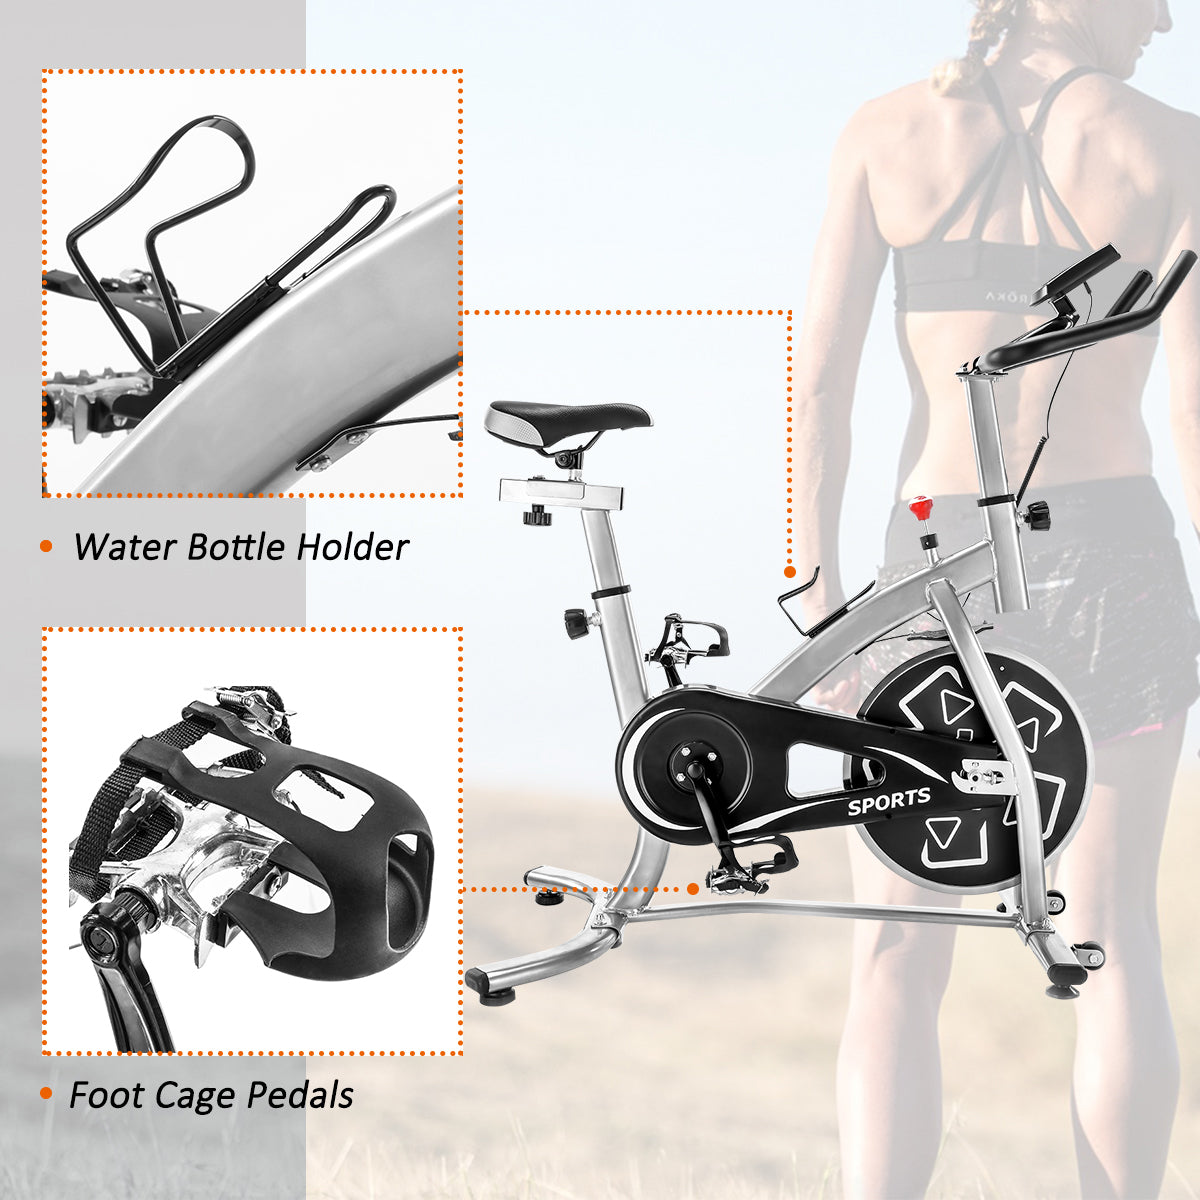 SKONYON Stationary Professional Indoor Cycling Bike S280 Trainer Exercise Bicycle with 24 lbs. Flywheel, SLIVER